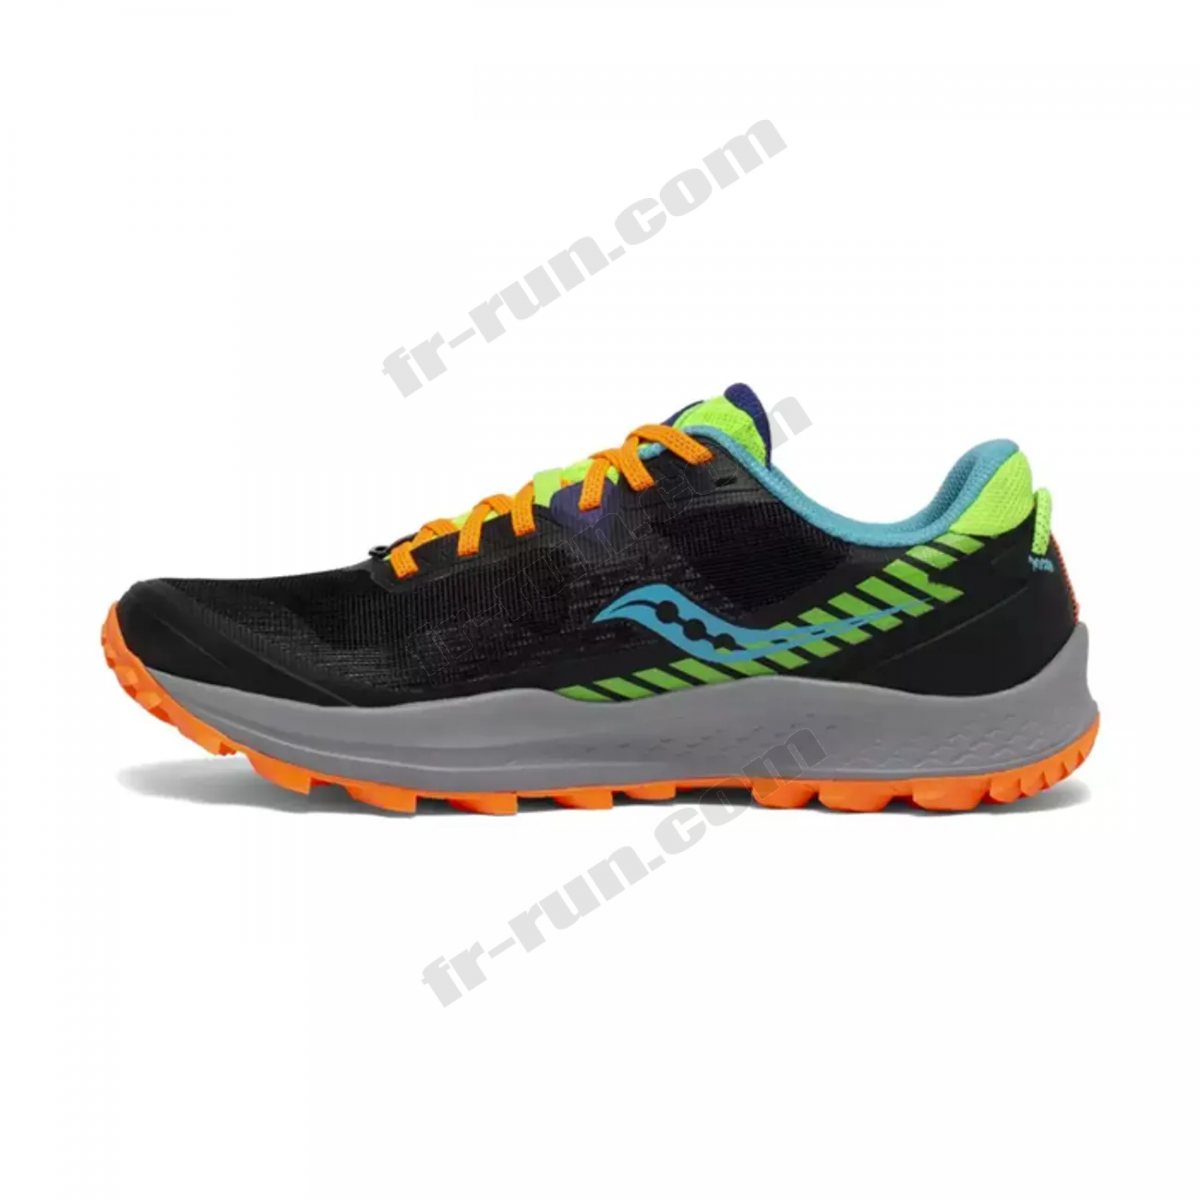 Saucony/CHAUSSURES BASSES running homme SAUCONY PEREGRINE 11 M √ Nouveau style √ Soldes - -0